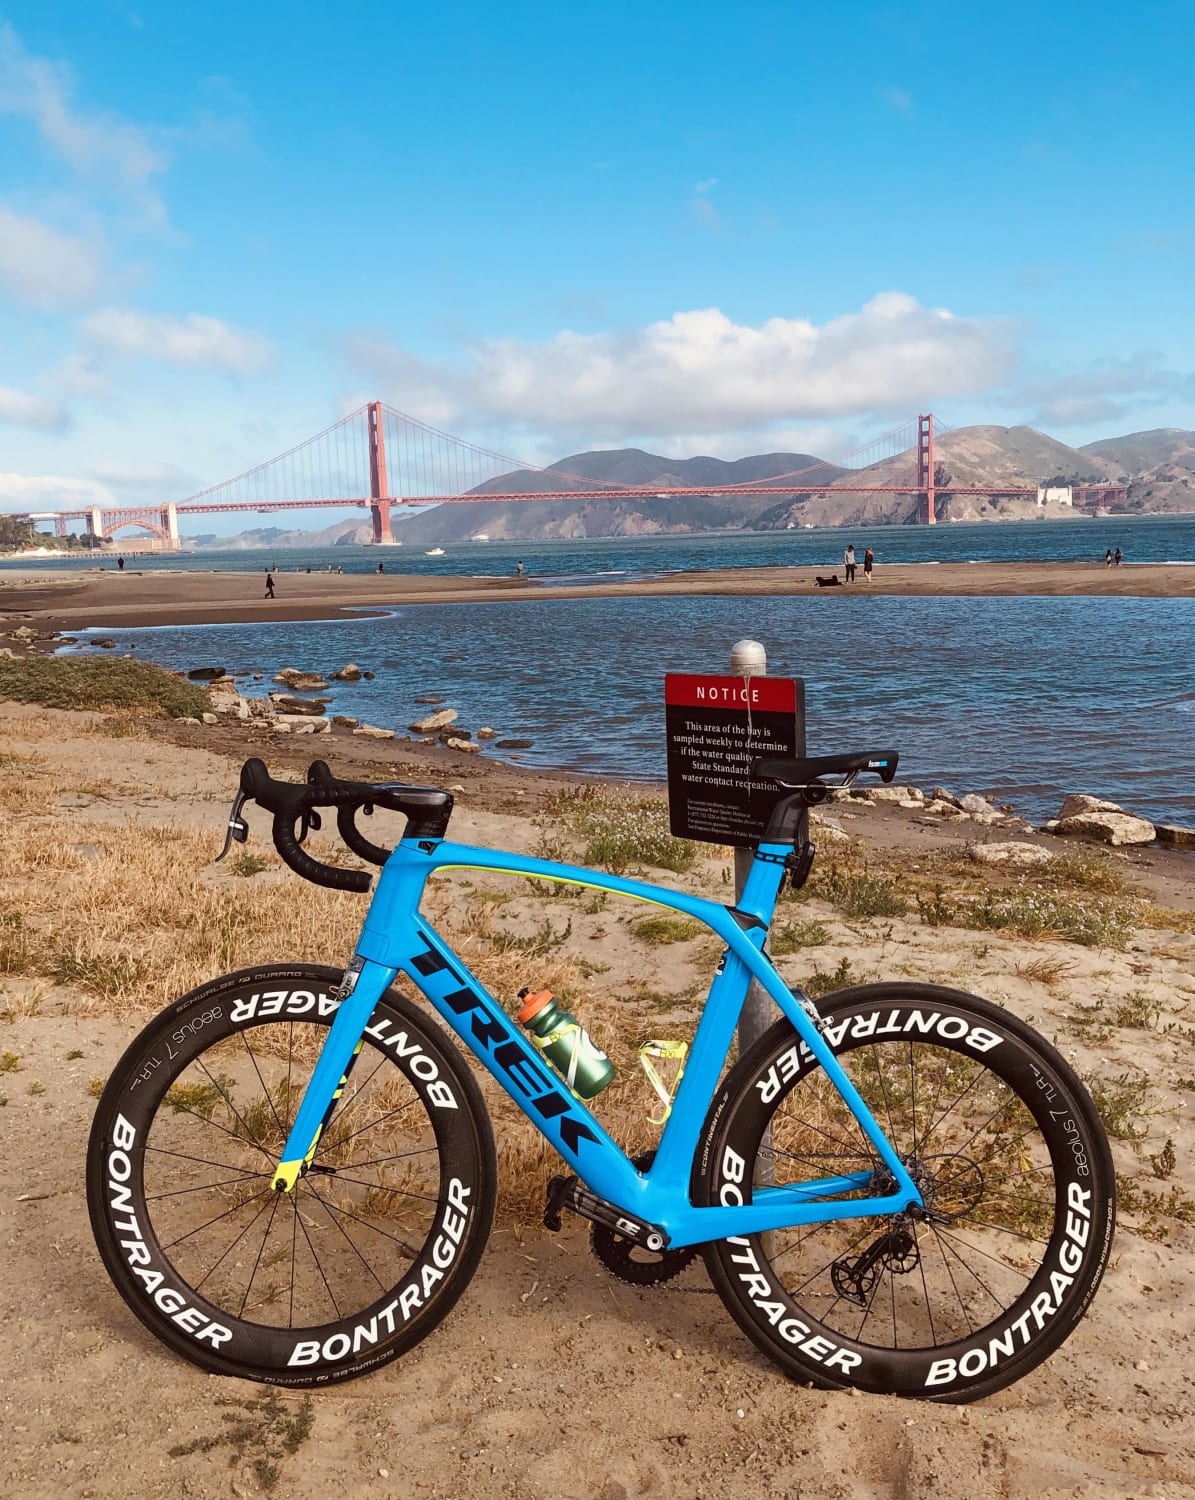 NBD - Trek Madone 9 and some bridge in the background